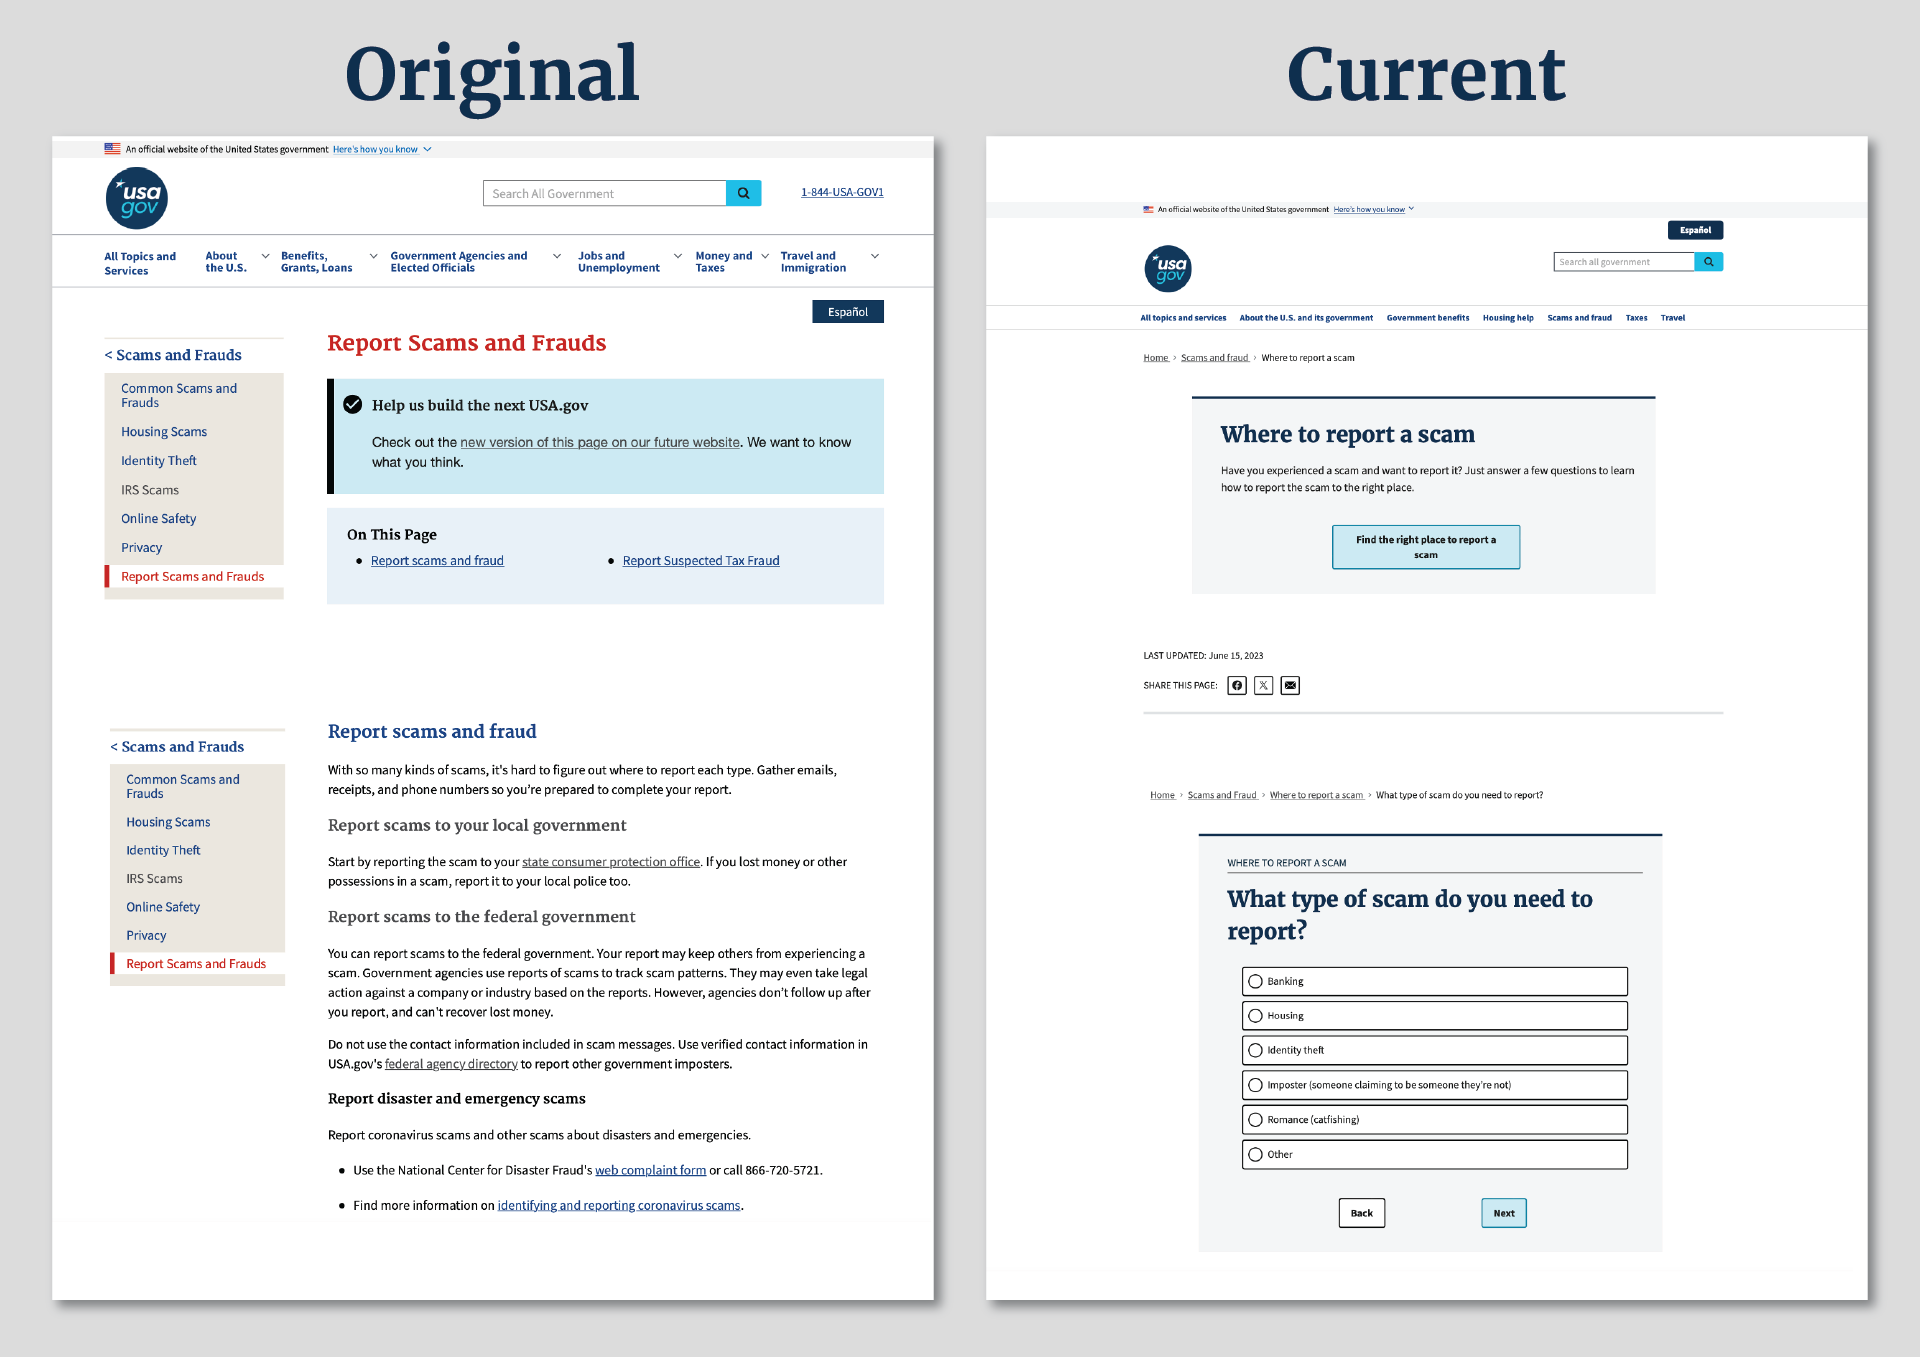 omparison of the original USA.gov scams wizard page (left) and current state of the scams wizard (right).